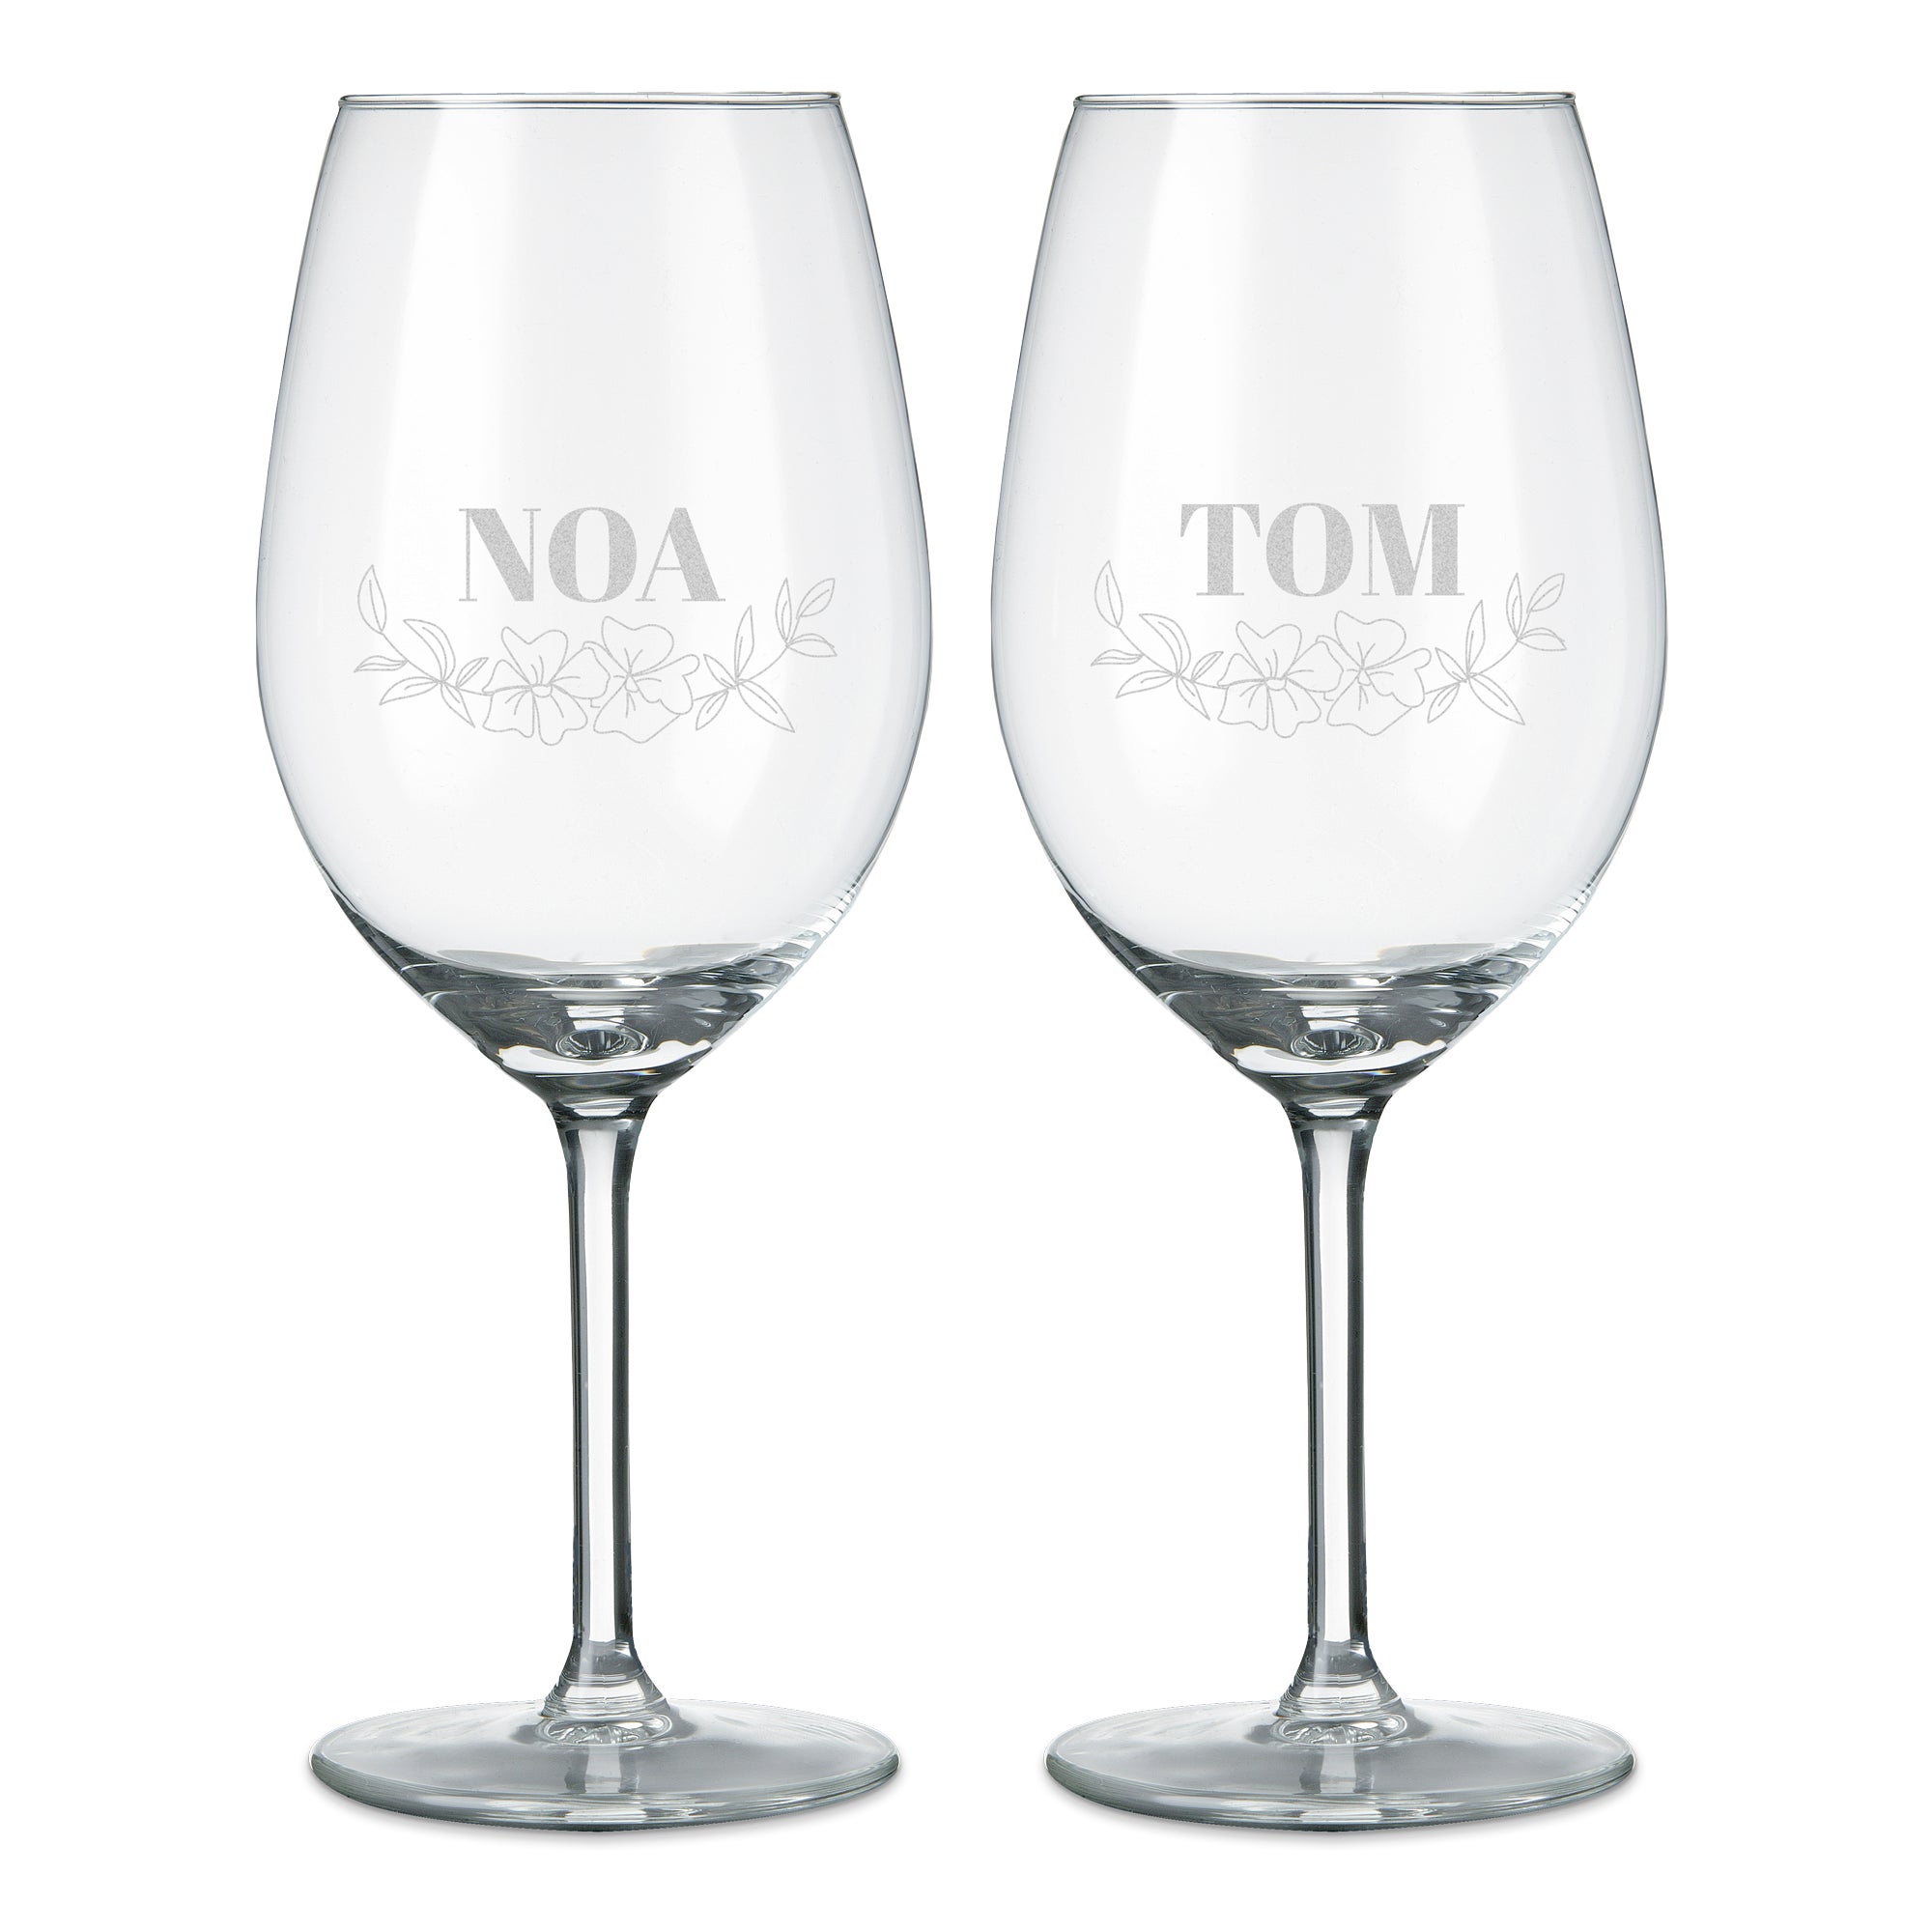 Personalised Red Wine Glasses - 2 pcs